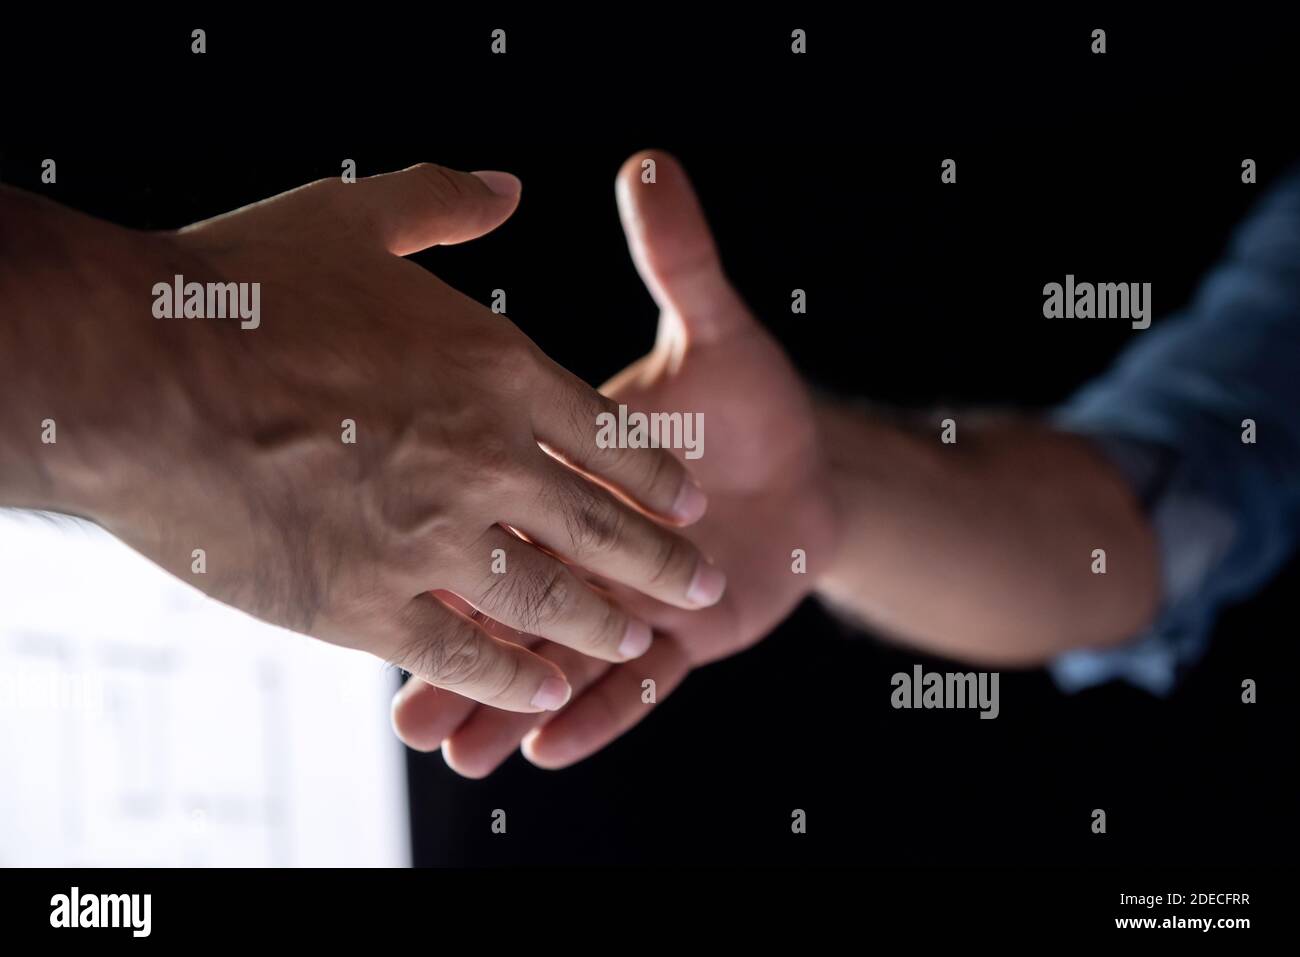 Businessmen reaching out for a handshake agreement during late night work in the office Stock Photo